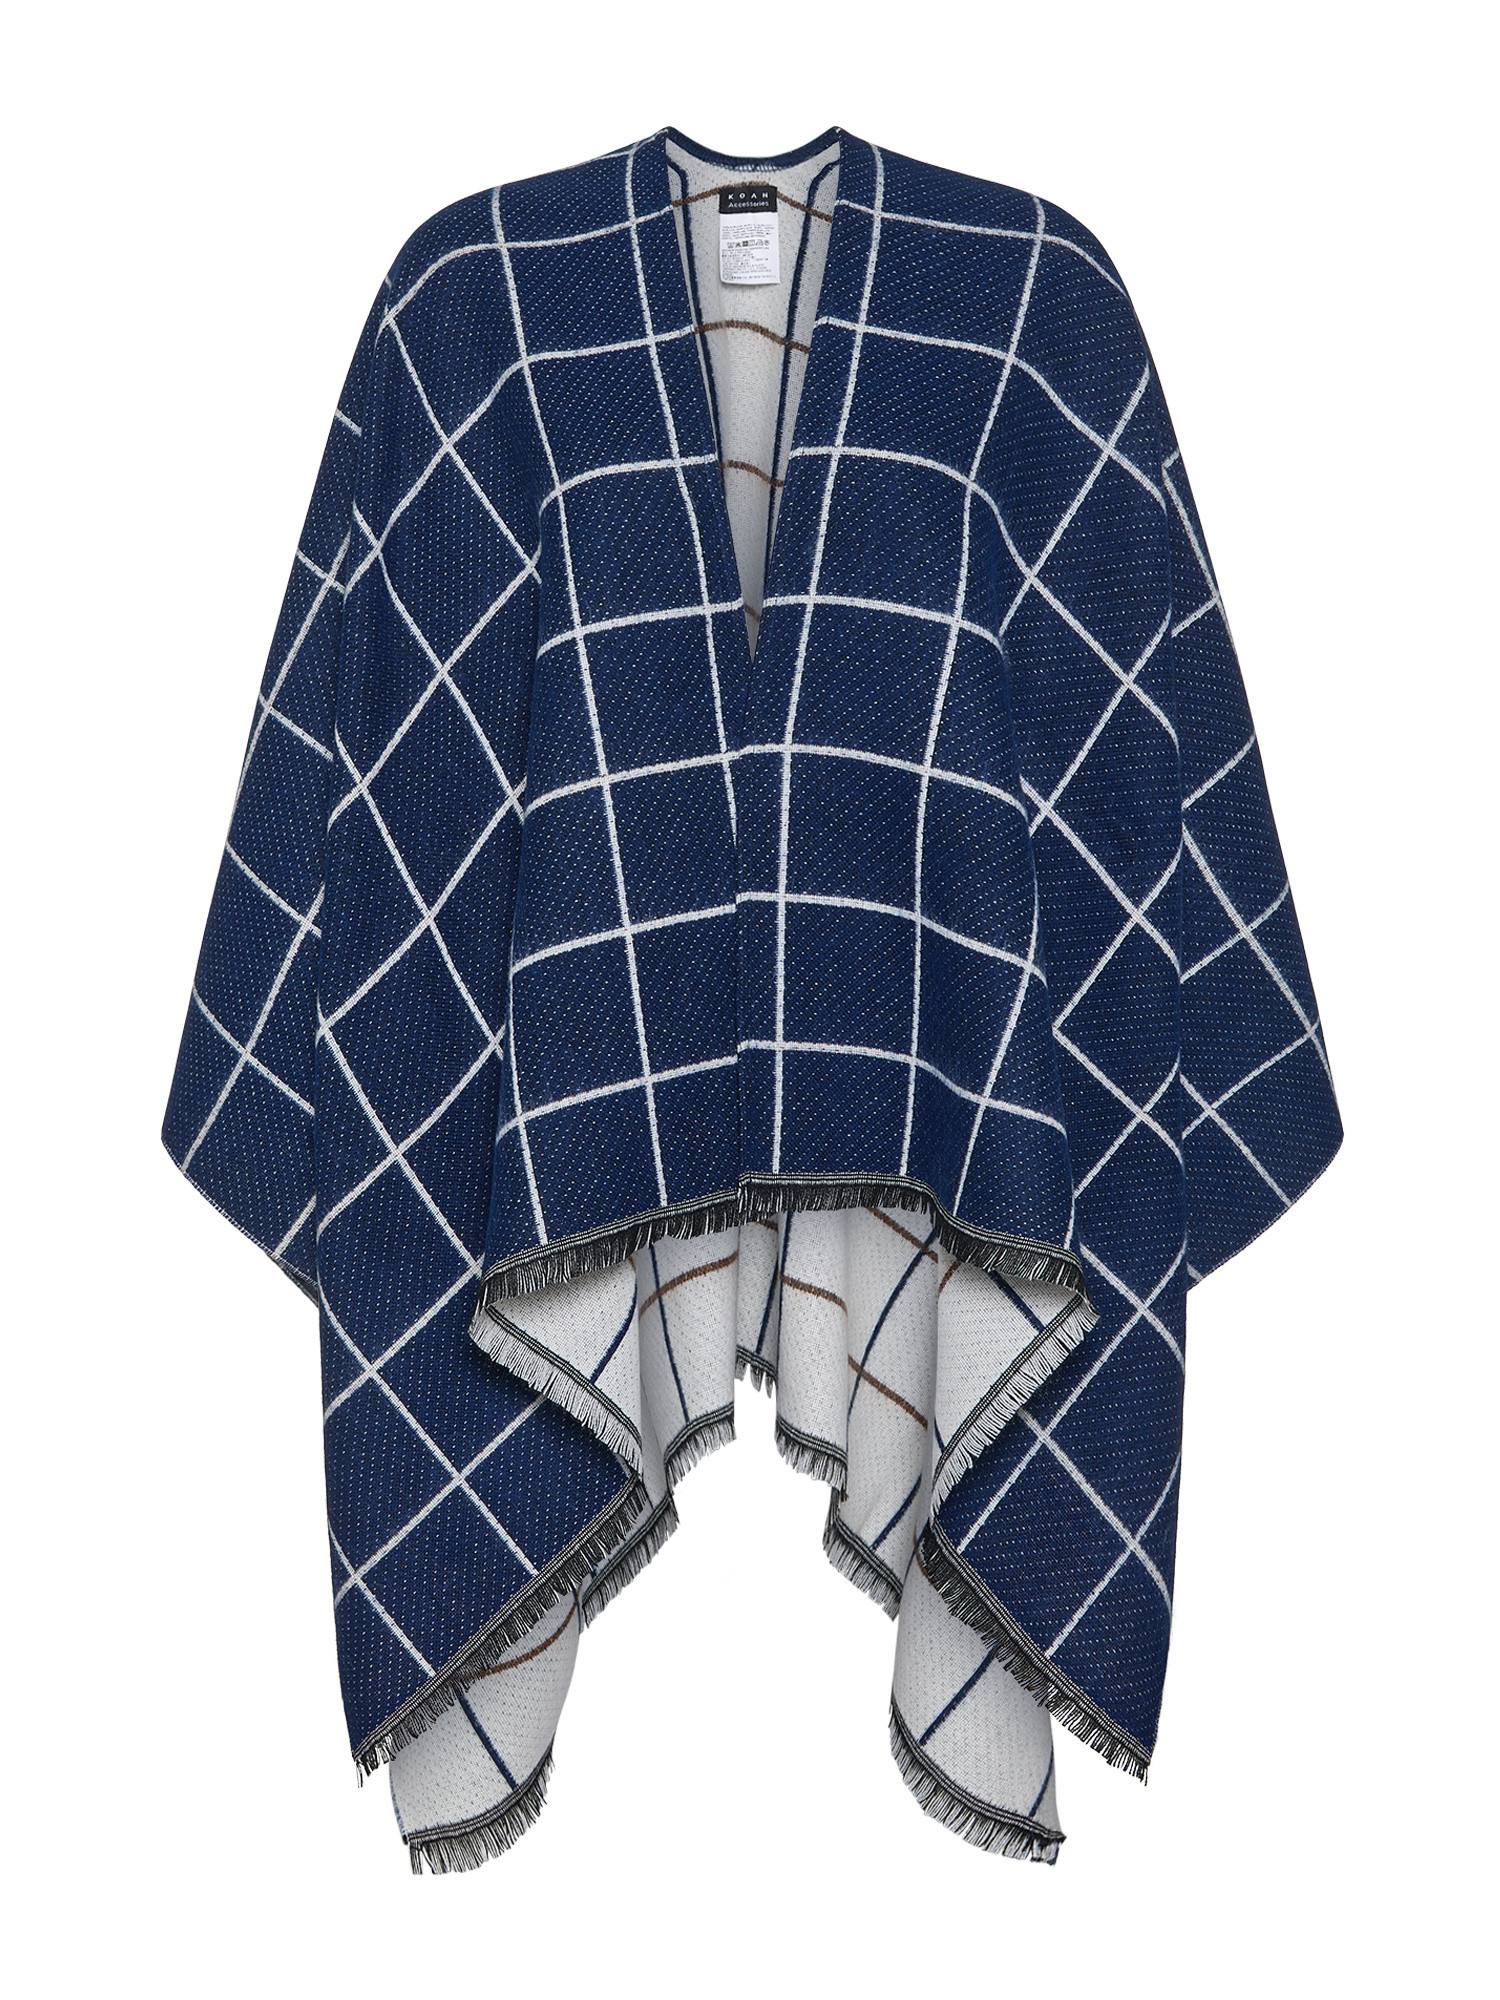 Koan - Checked cape, Blue, large image number 0